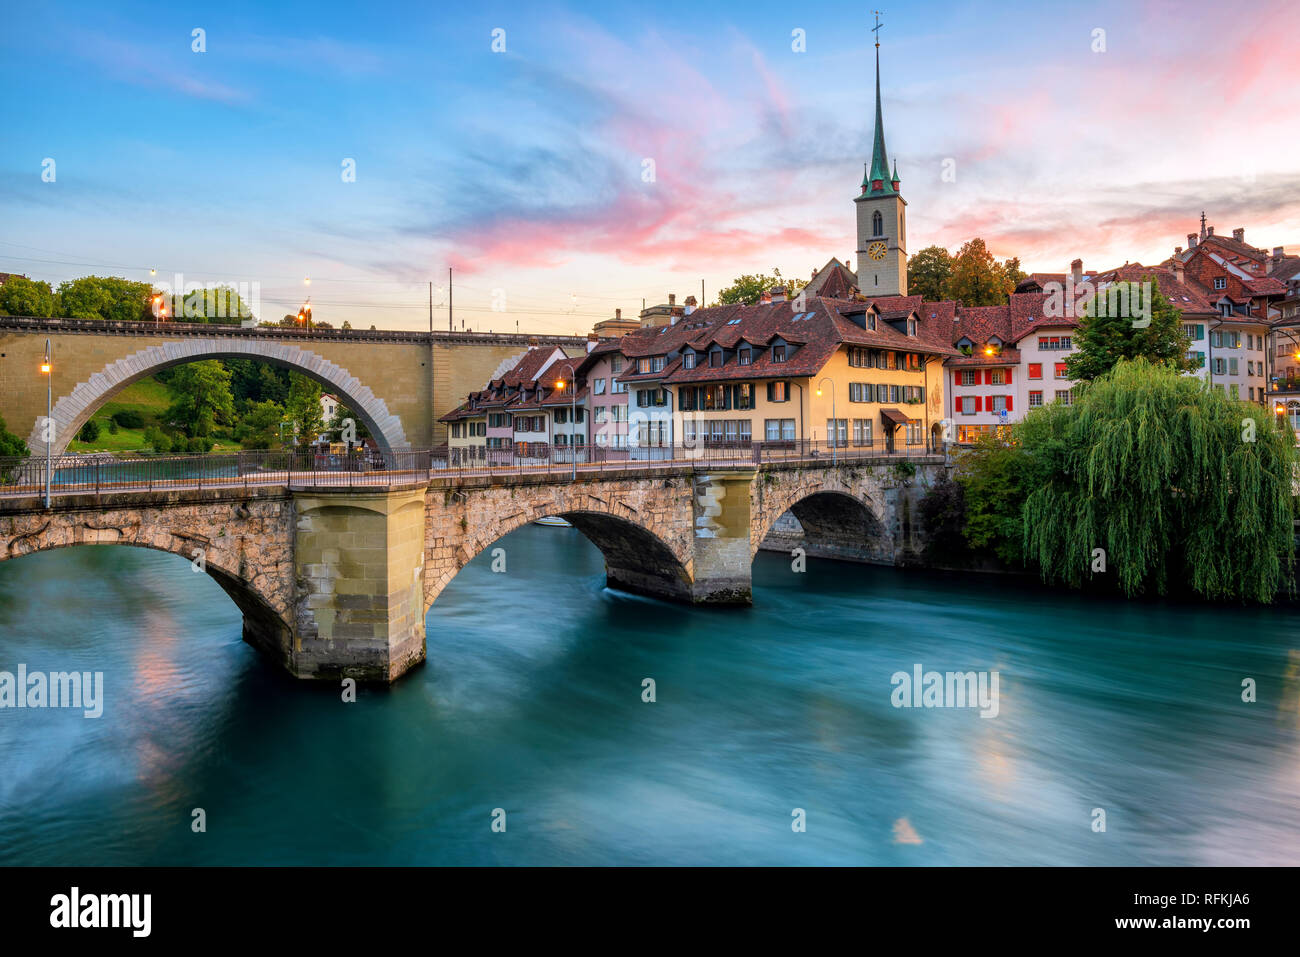 Historical Old Town of Bern city, tiled roofs, bridges over Aare river and church tower on dramatic sunset, Switzerland Stock Photo